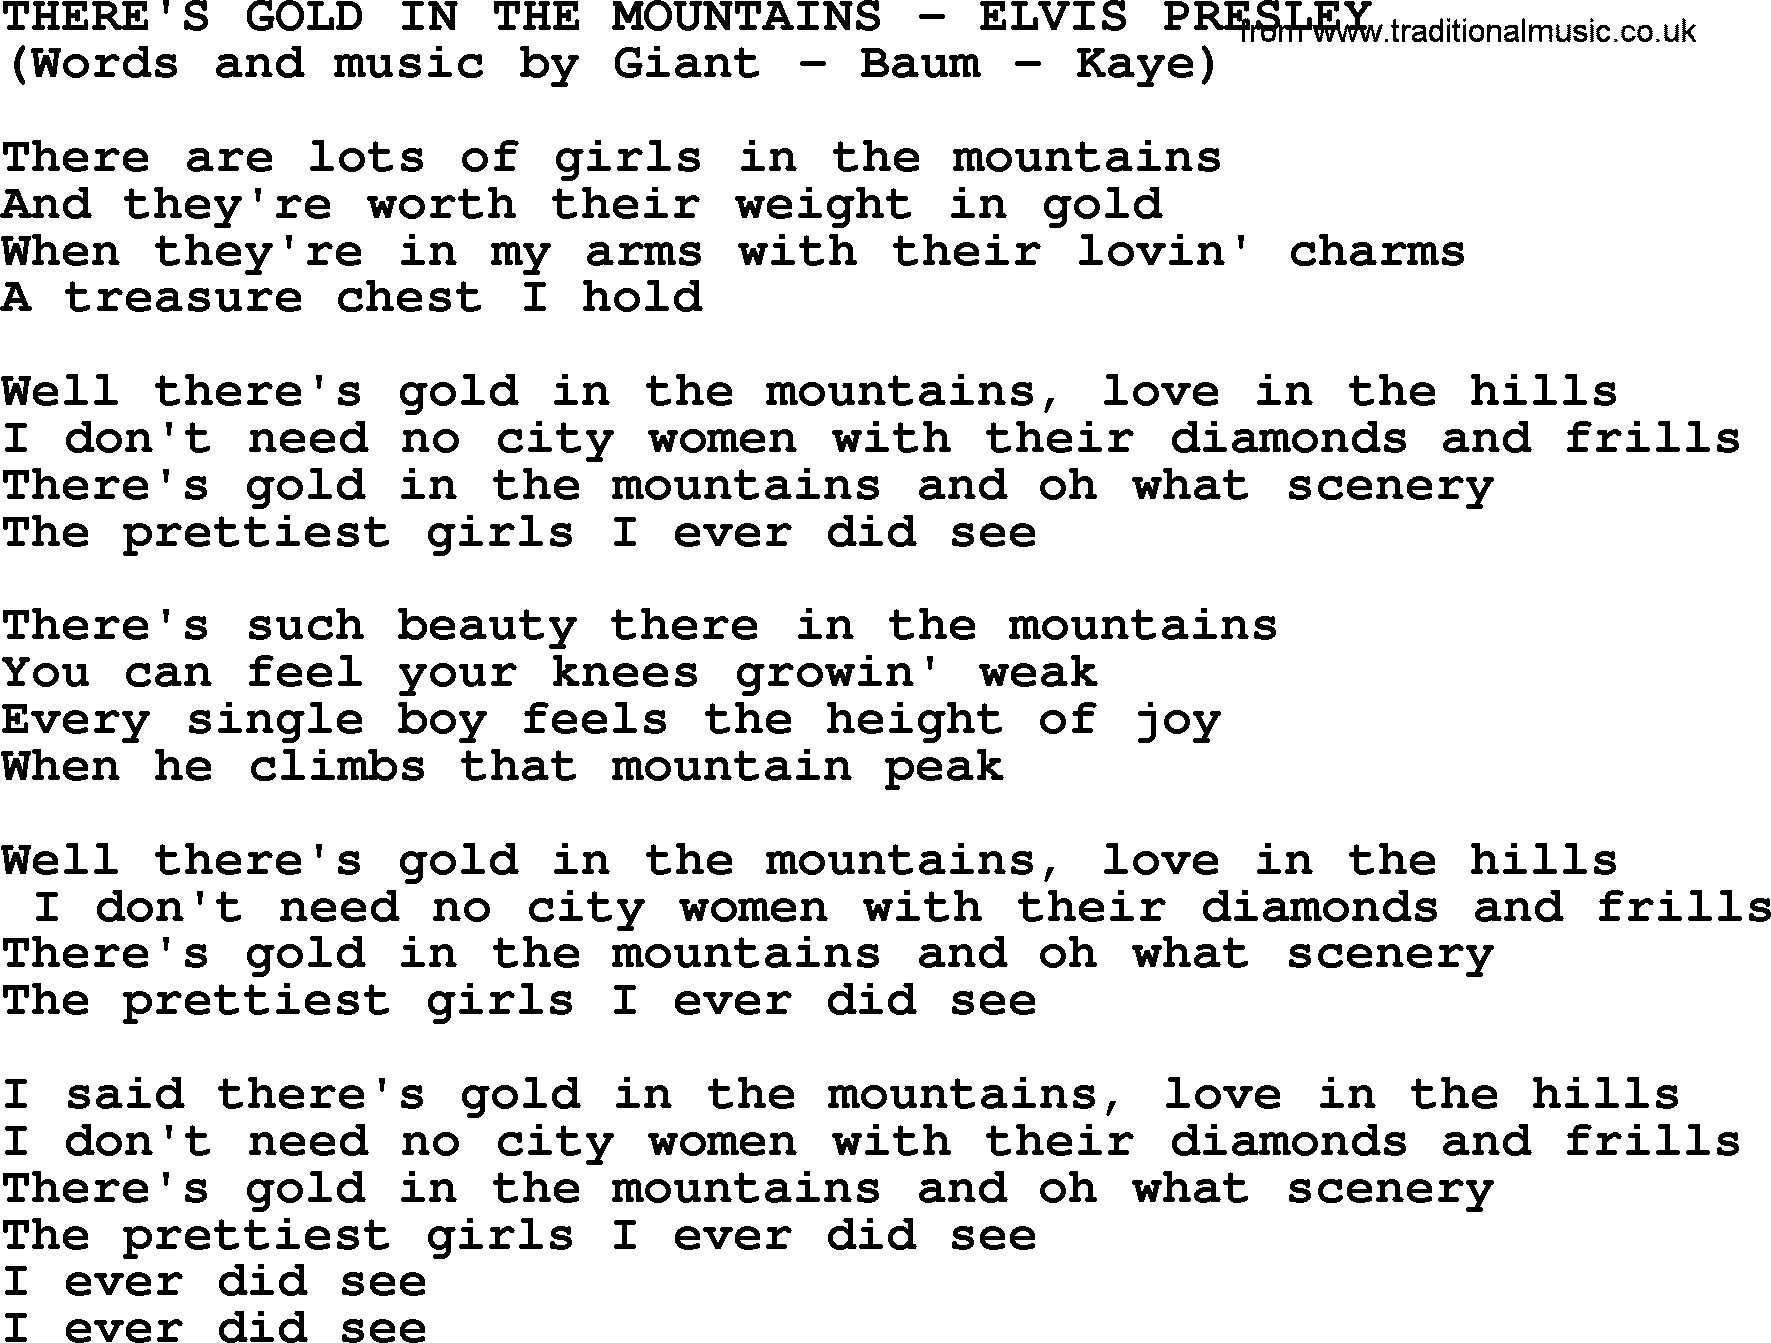 Elvis Presley song: There's Gold In The Mountains lyrics